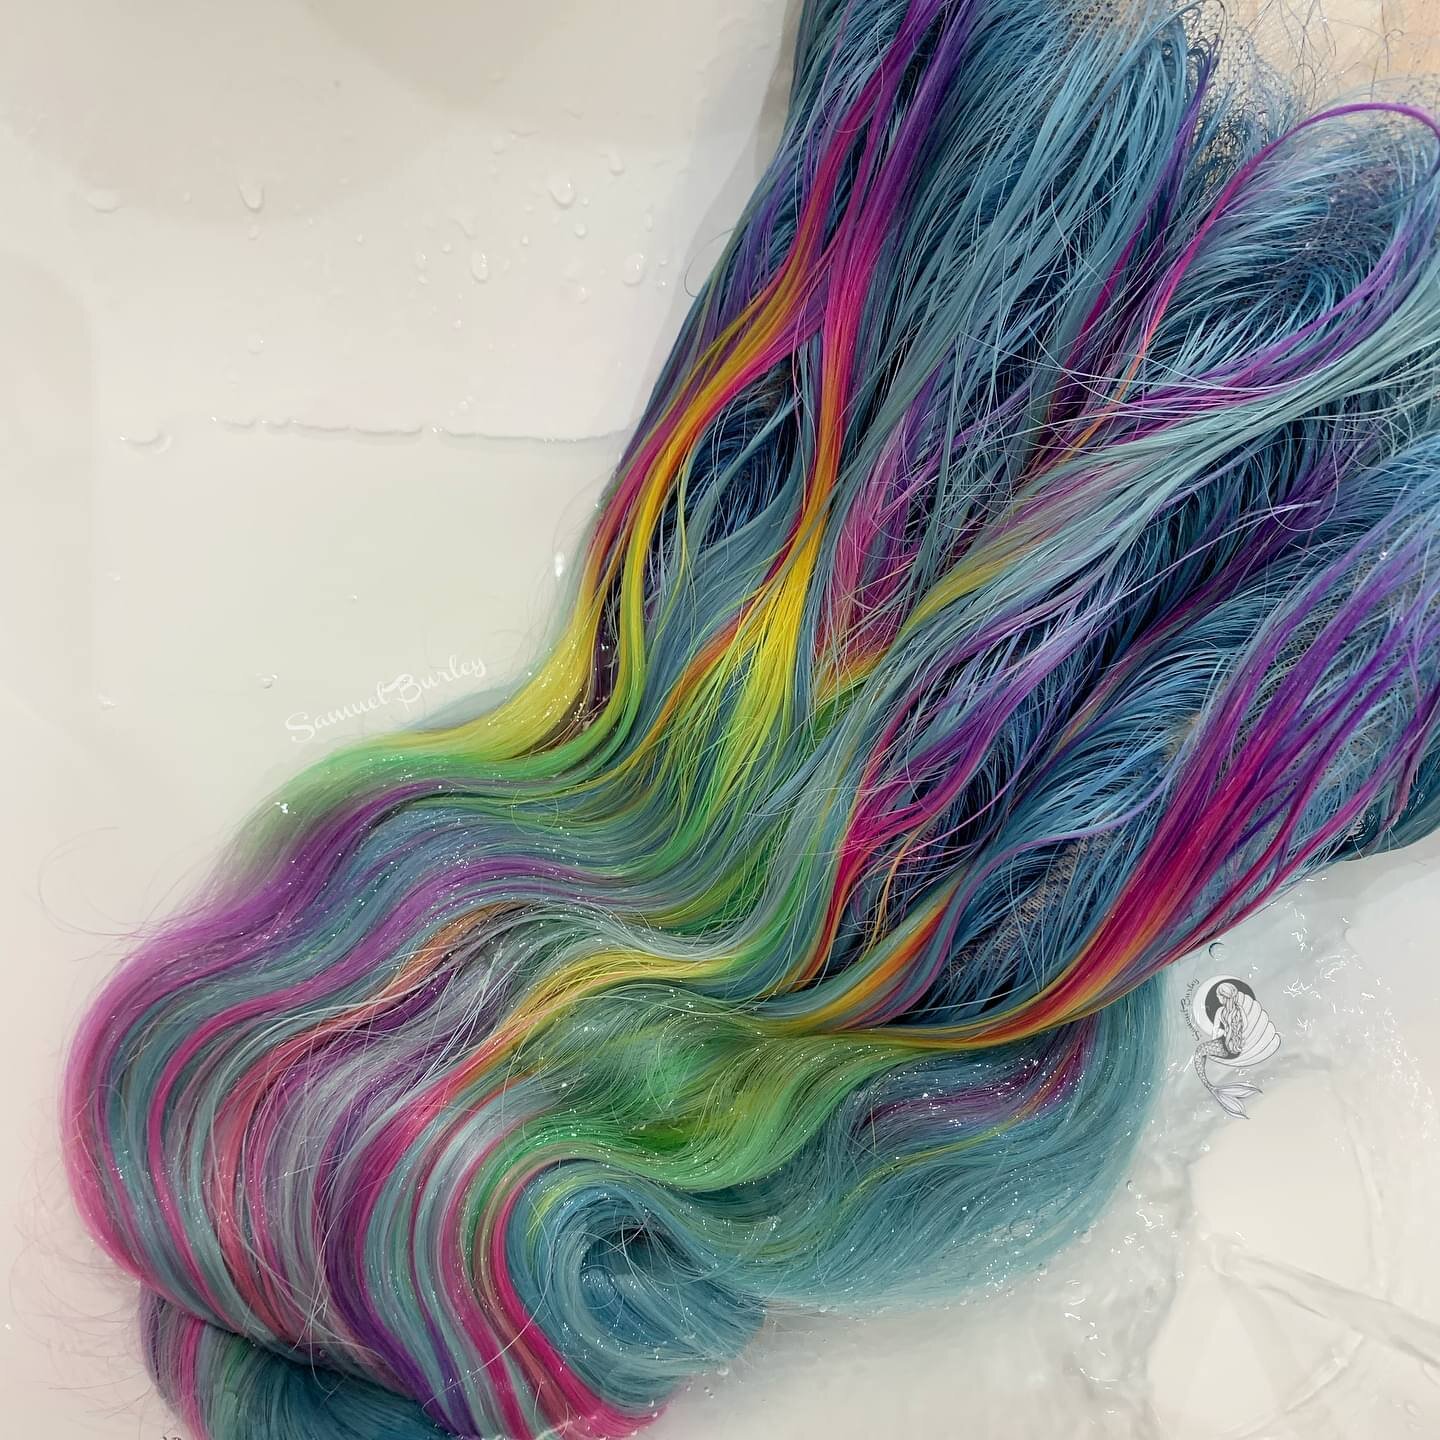 When rinsing a colour looks this good 🌈
Holographic full lace wig. Why? why not.